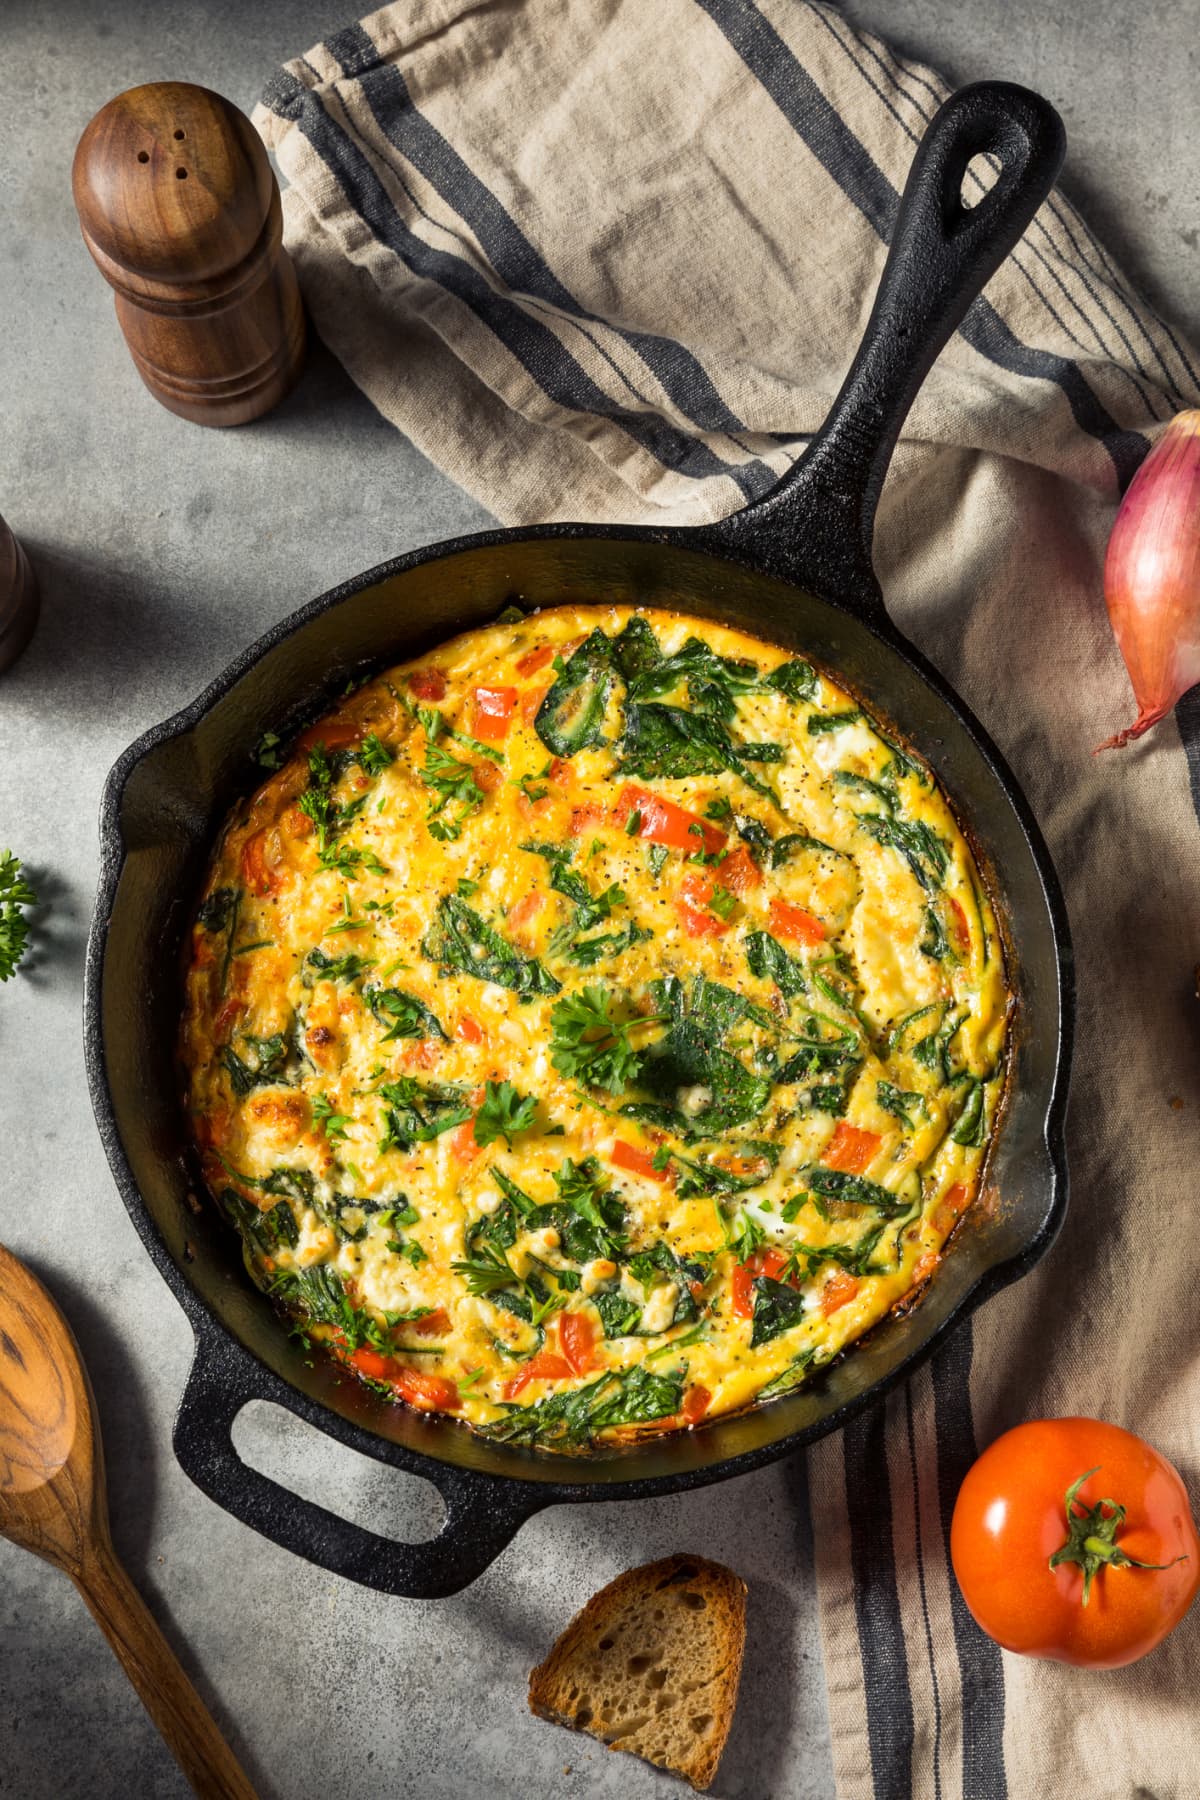 Homemade Egg and Spinach Frittata with Feta